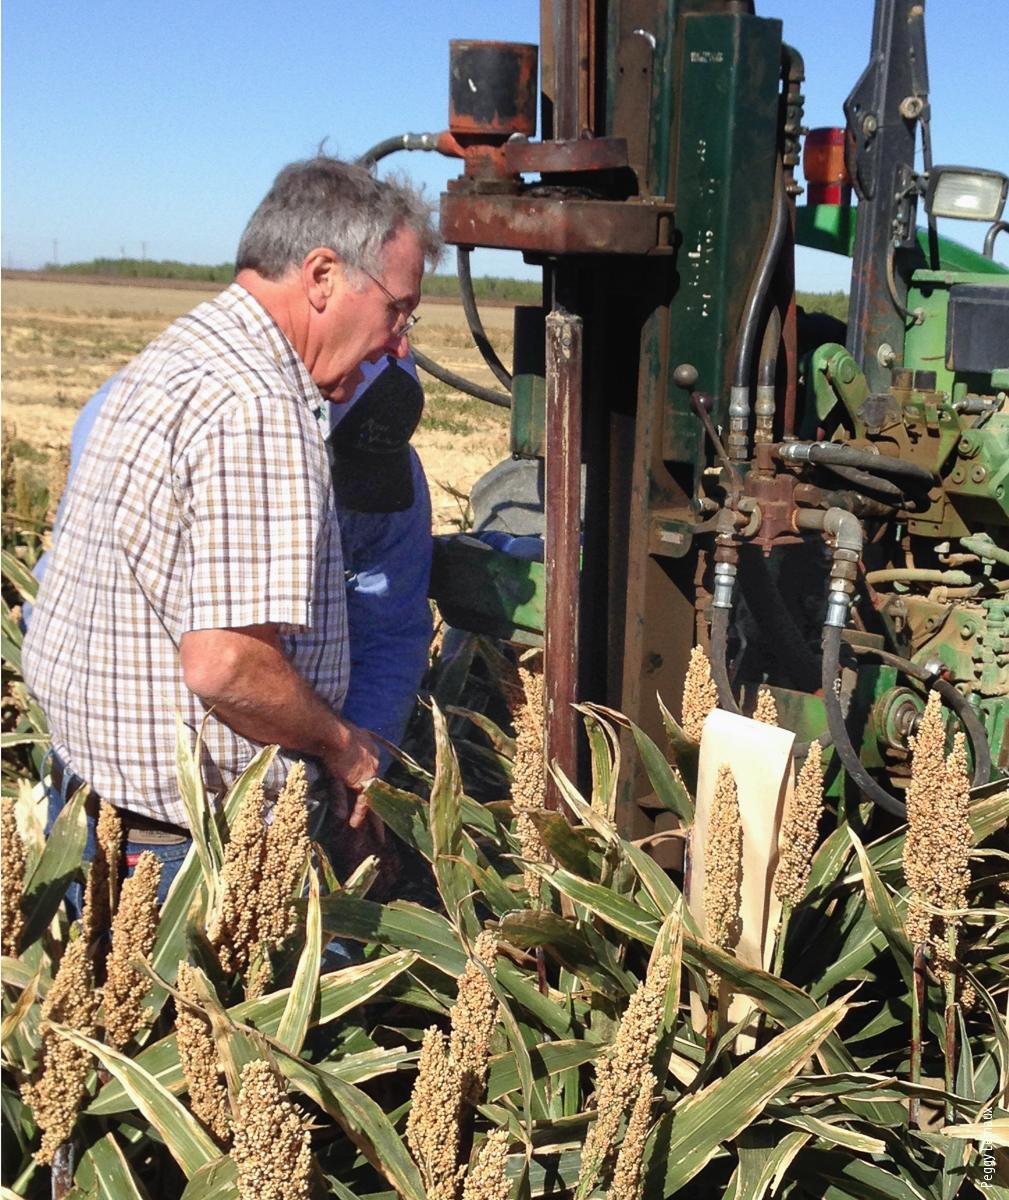 West Side REC director Bob Hutmacher collects a soil sample next to a sorghum plant to evaluate the microbial population around sorghum roots.